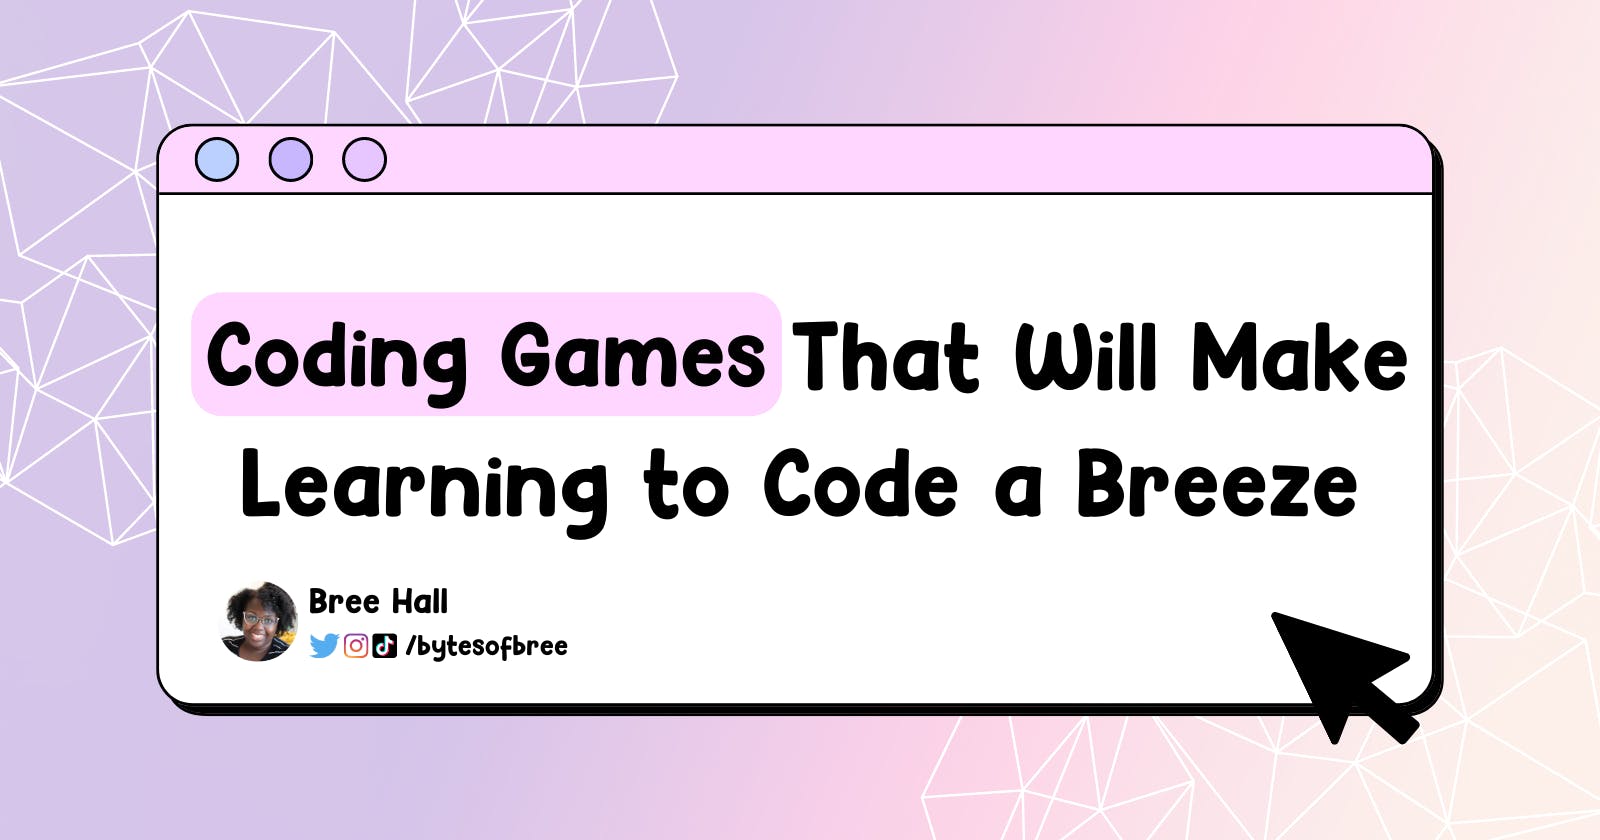 Coding Games That Make Learning to Code a Breeze